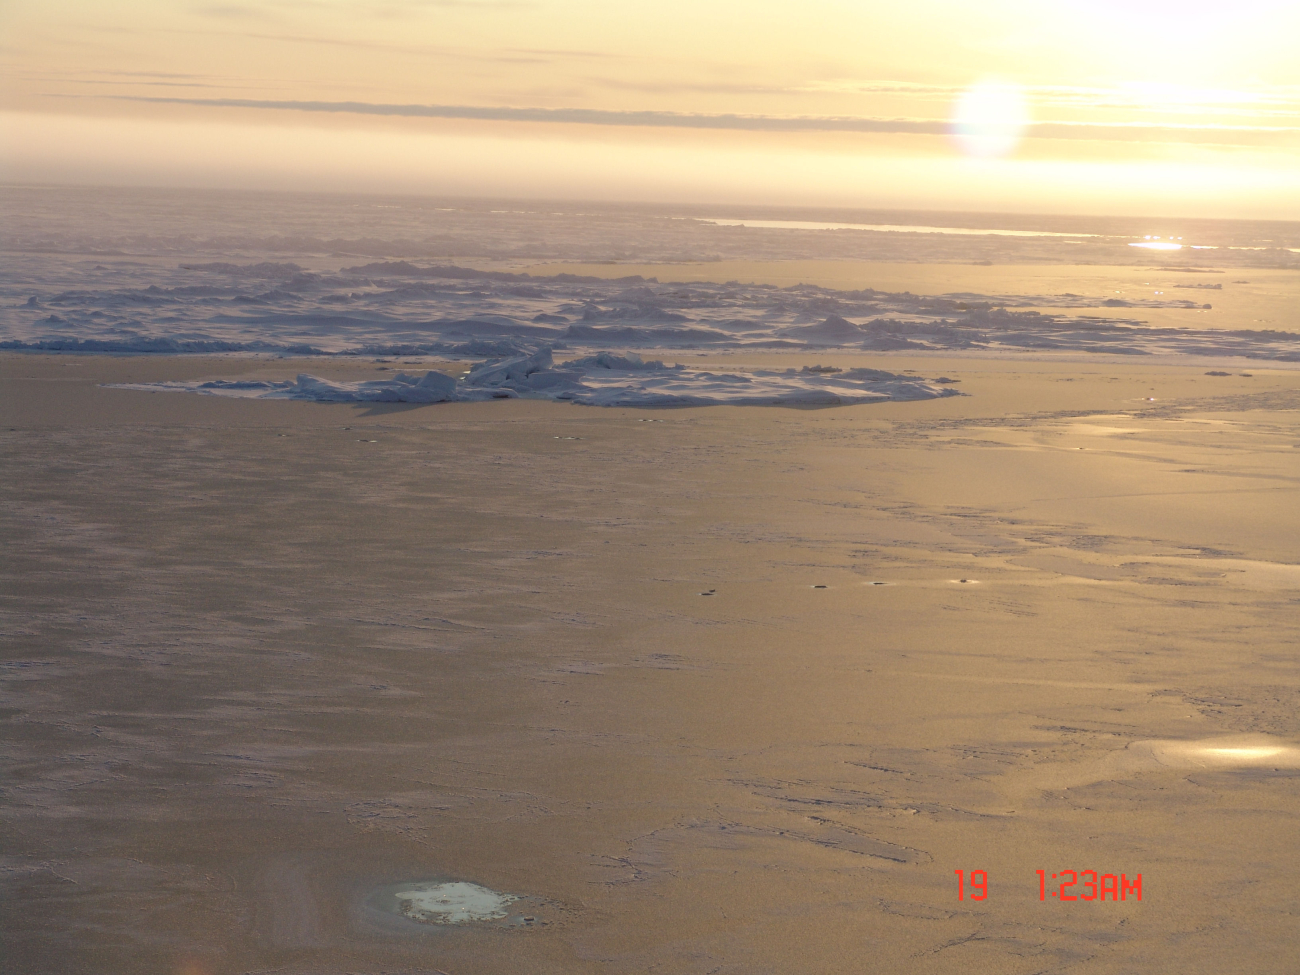 New ice formed over a polynya with ice ridges and mult-year ice in distance